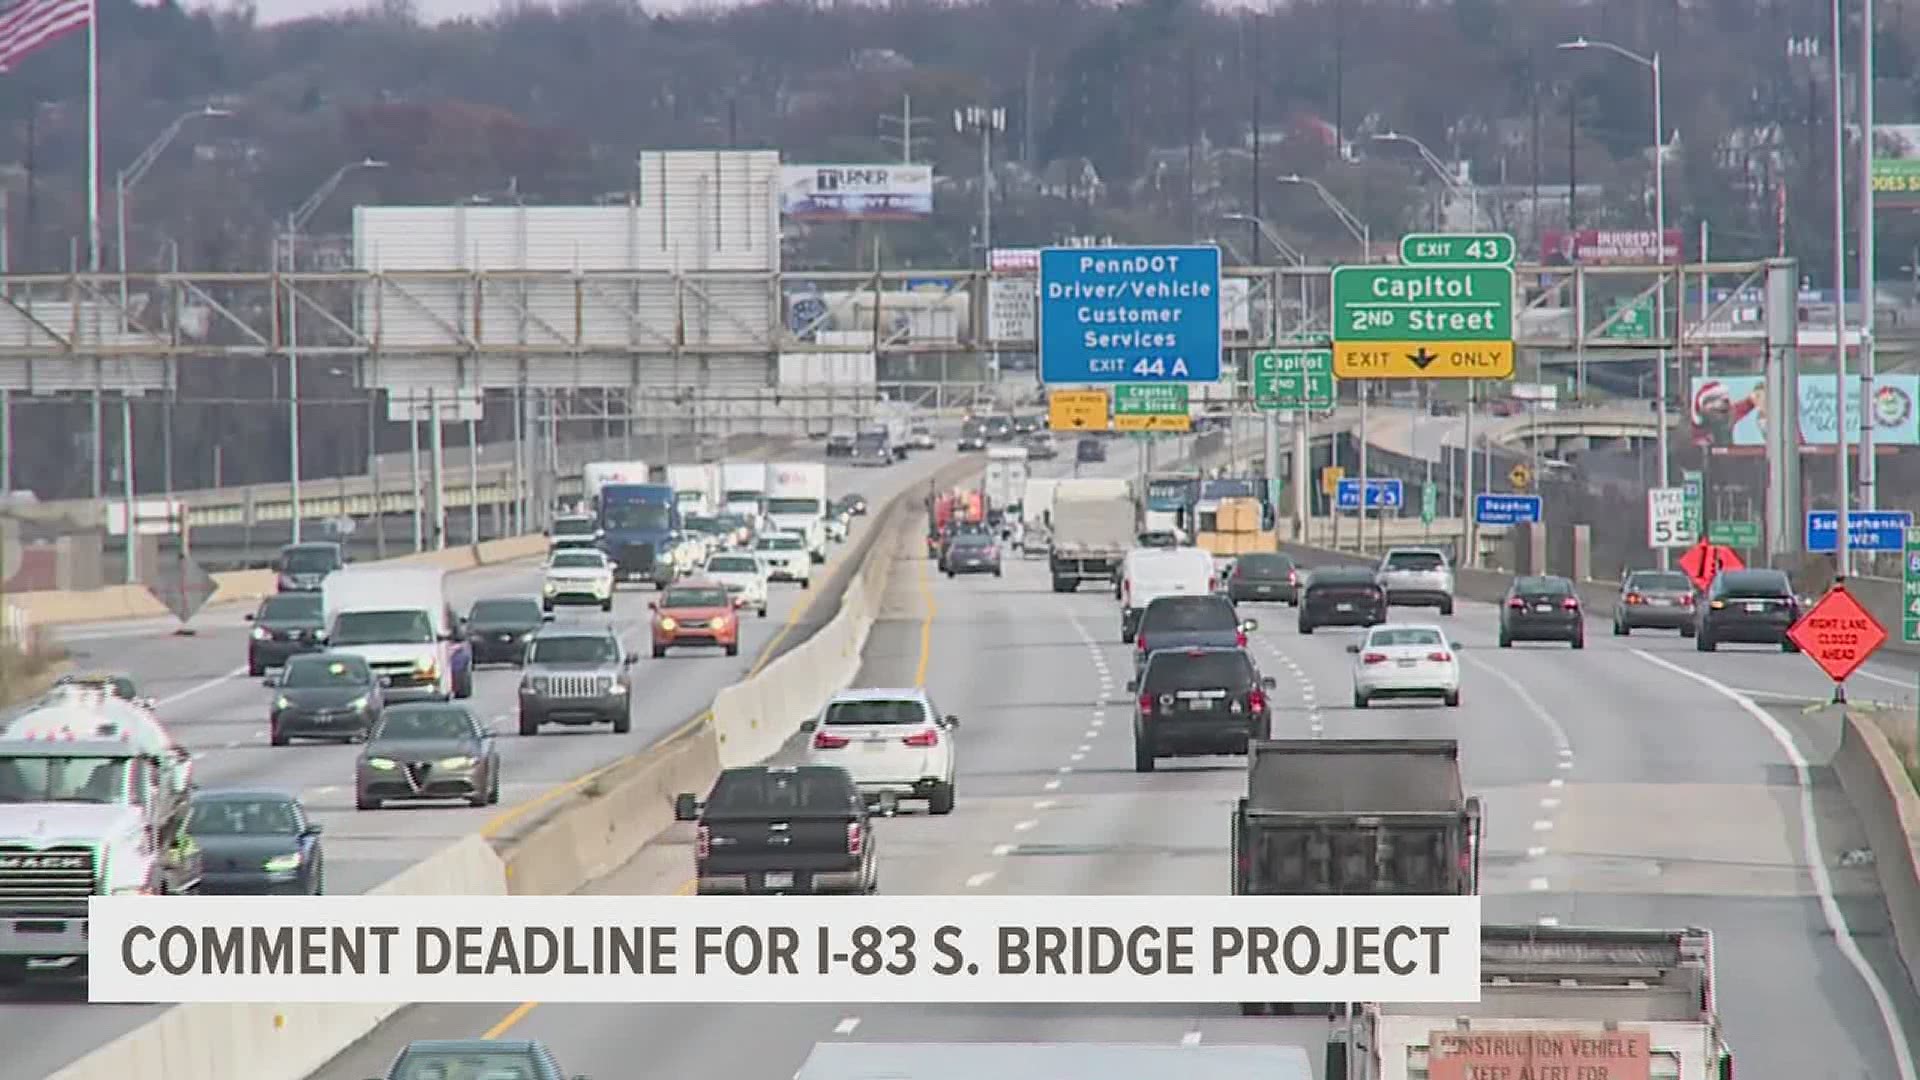 As of Friday, PennDOT received 858 comments on the tolling proposal. 72% were negative, 25% neutral, and 3% were positive.